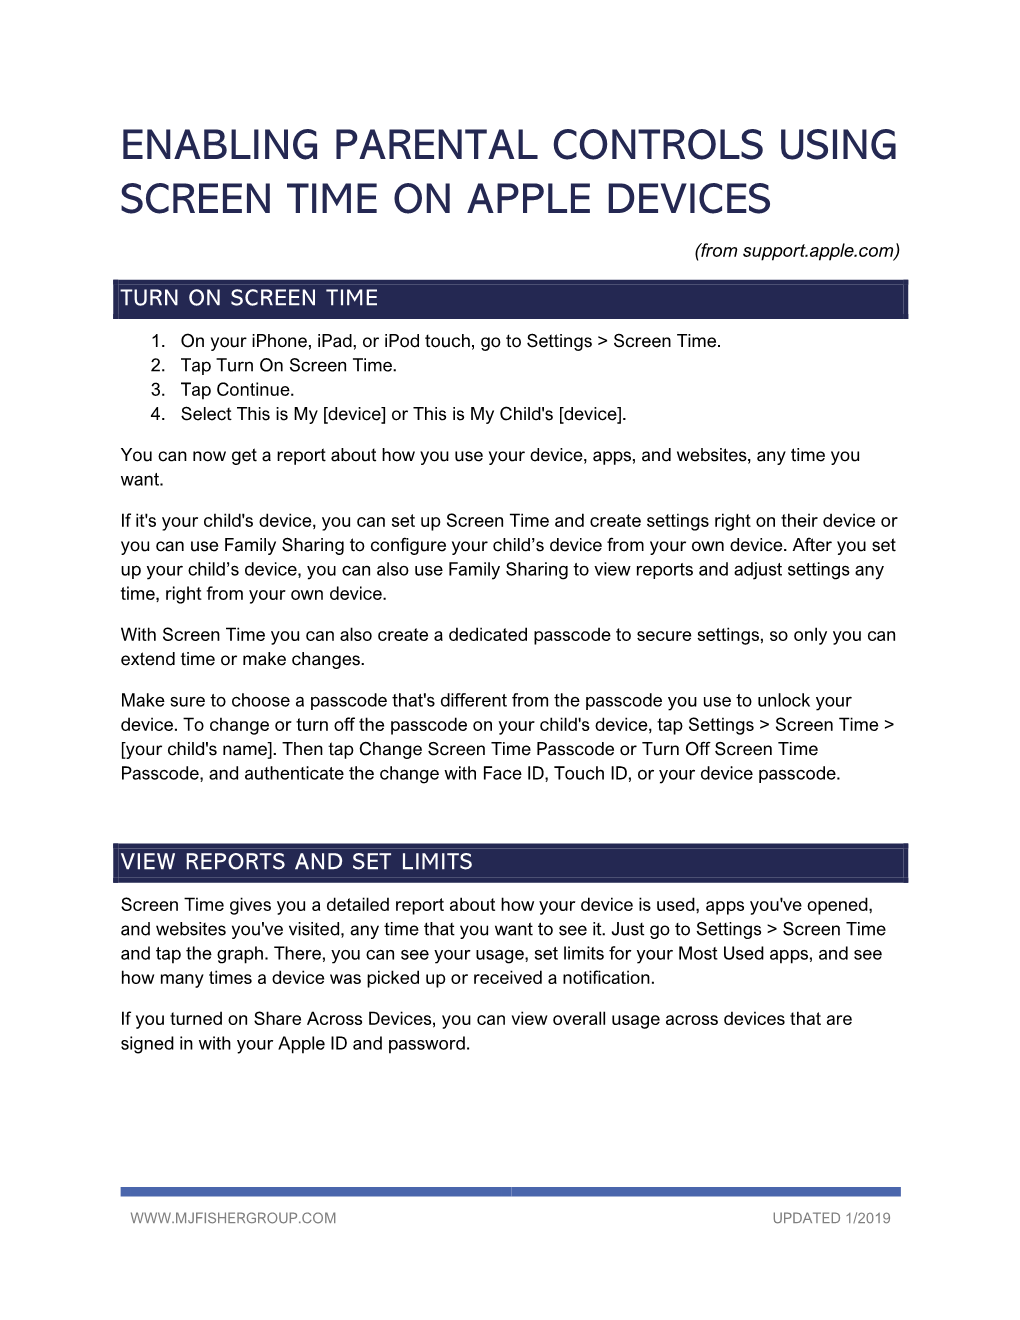 Enabling Parental Controls Using Screen Time on Apple Devices